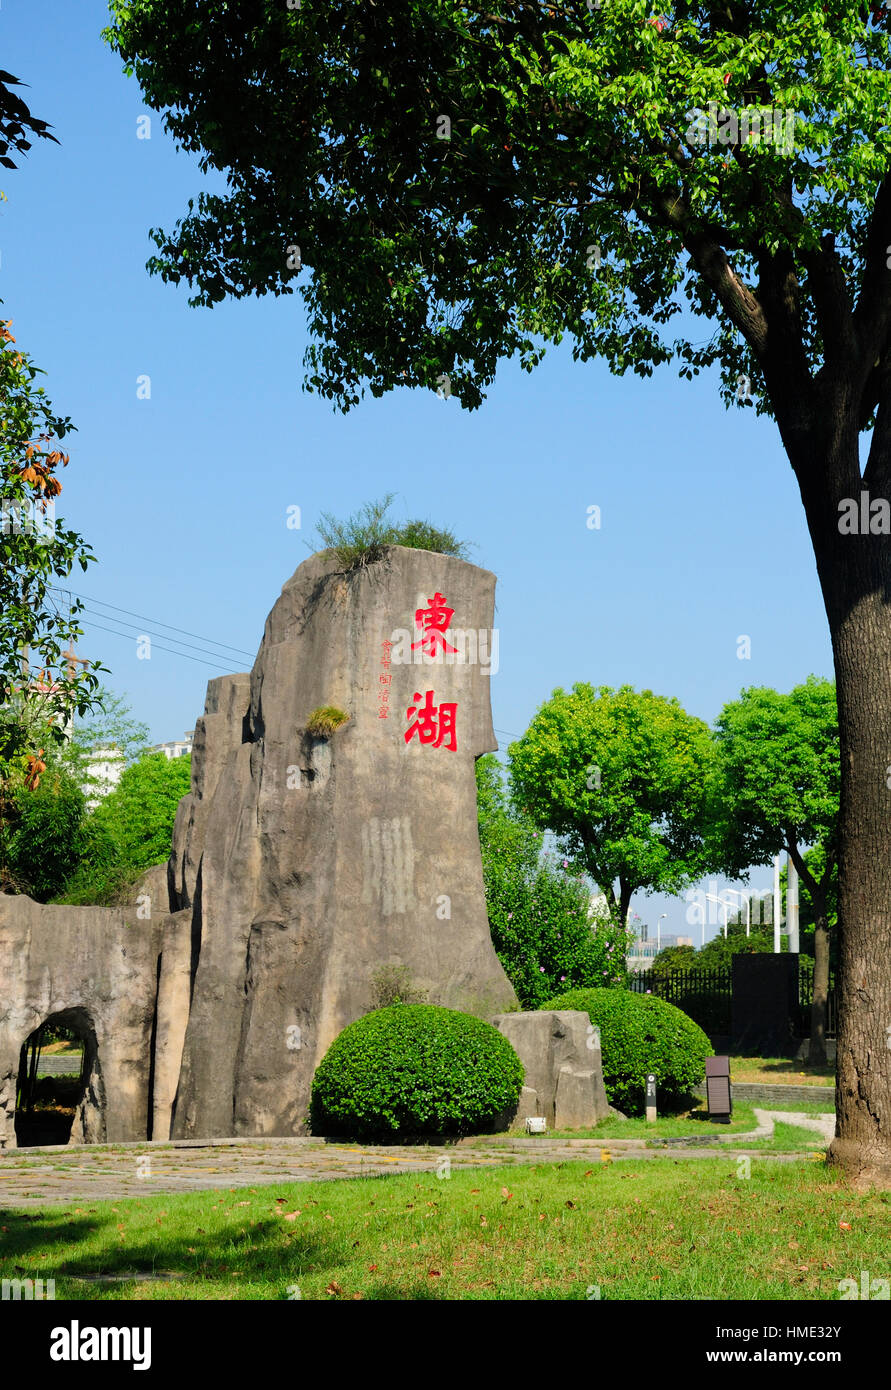 A rock at a park with the traditional chinese characters dong hu meaning  east lake in the city of shaoxing china on a blue sky day in Zhejiang  provinc Stock Photo -